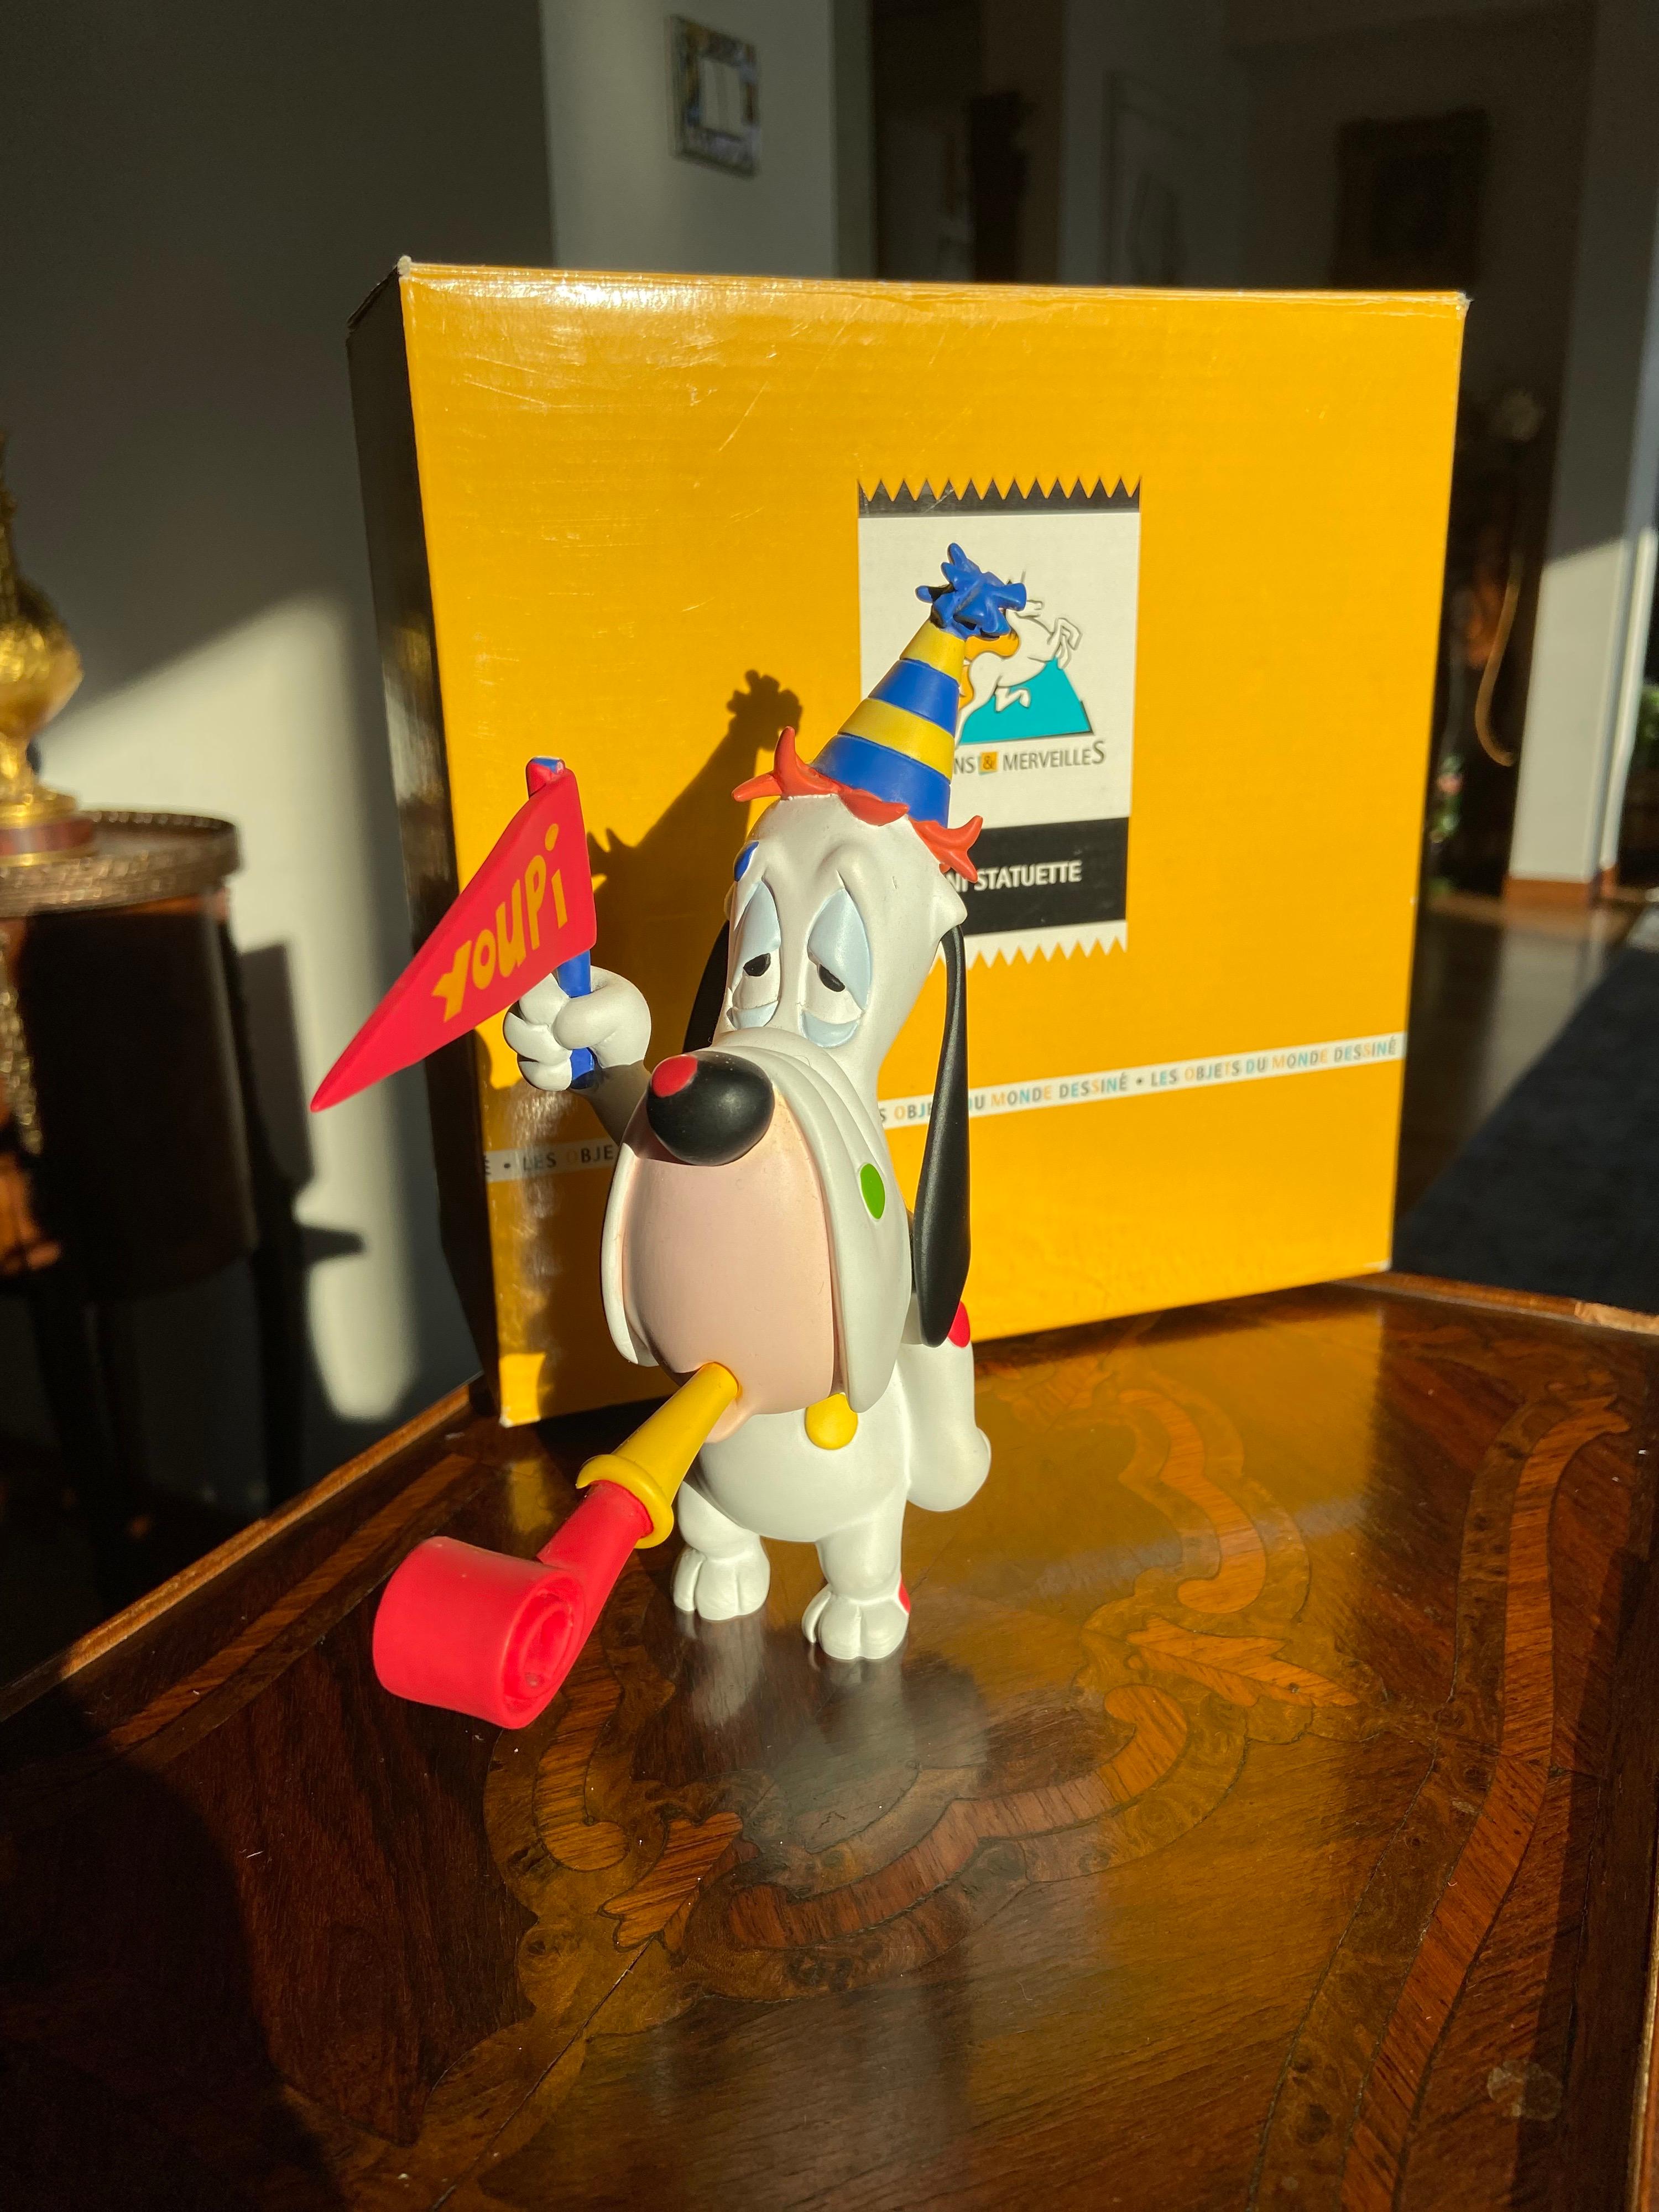 Figurine statue of Droopy ready to party by Demons & Merveilles.
Made in 2000 in its original box in perfect condition.
Perfect gift and a part of a large collection.
USA, 2000.